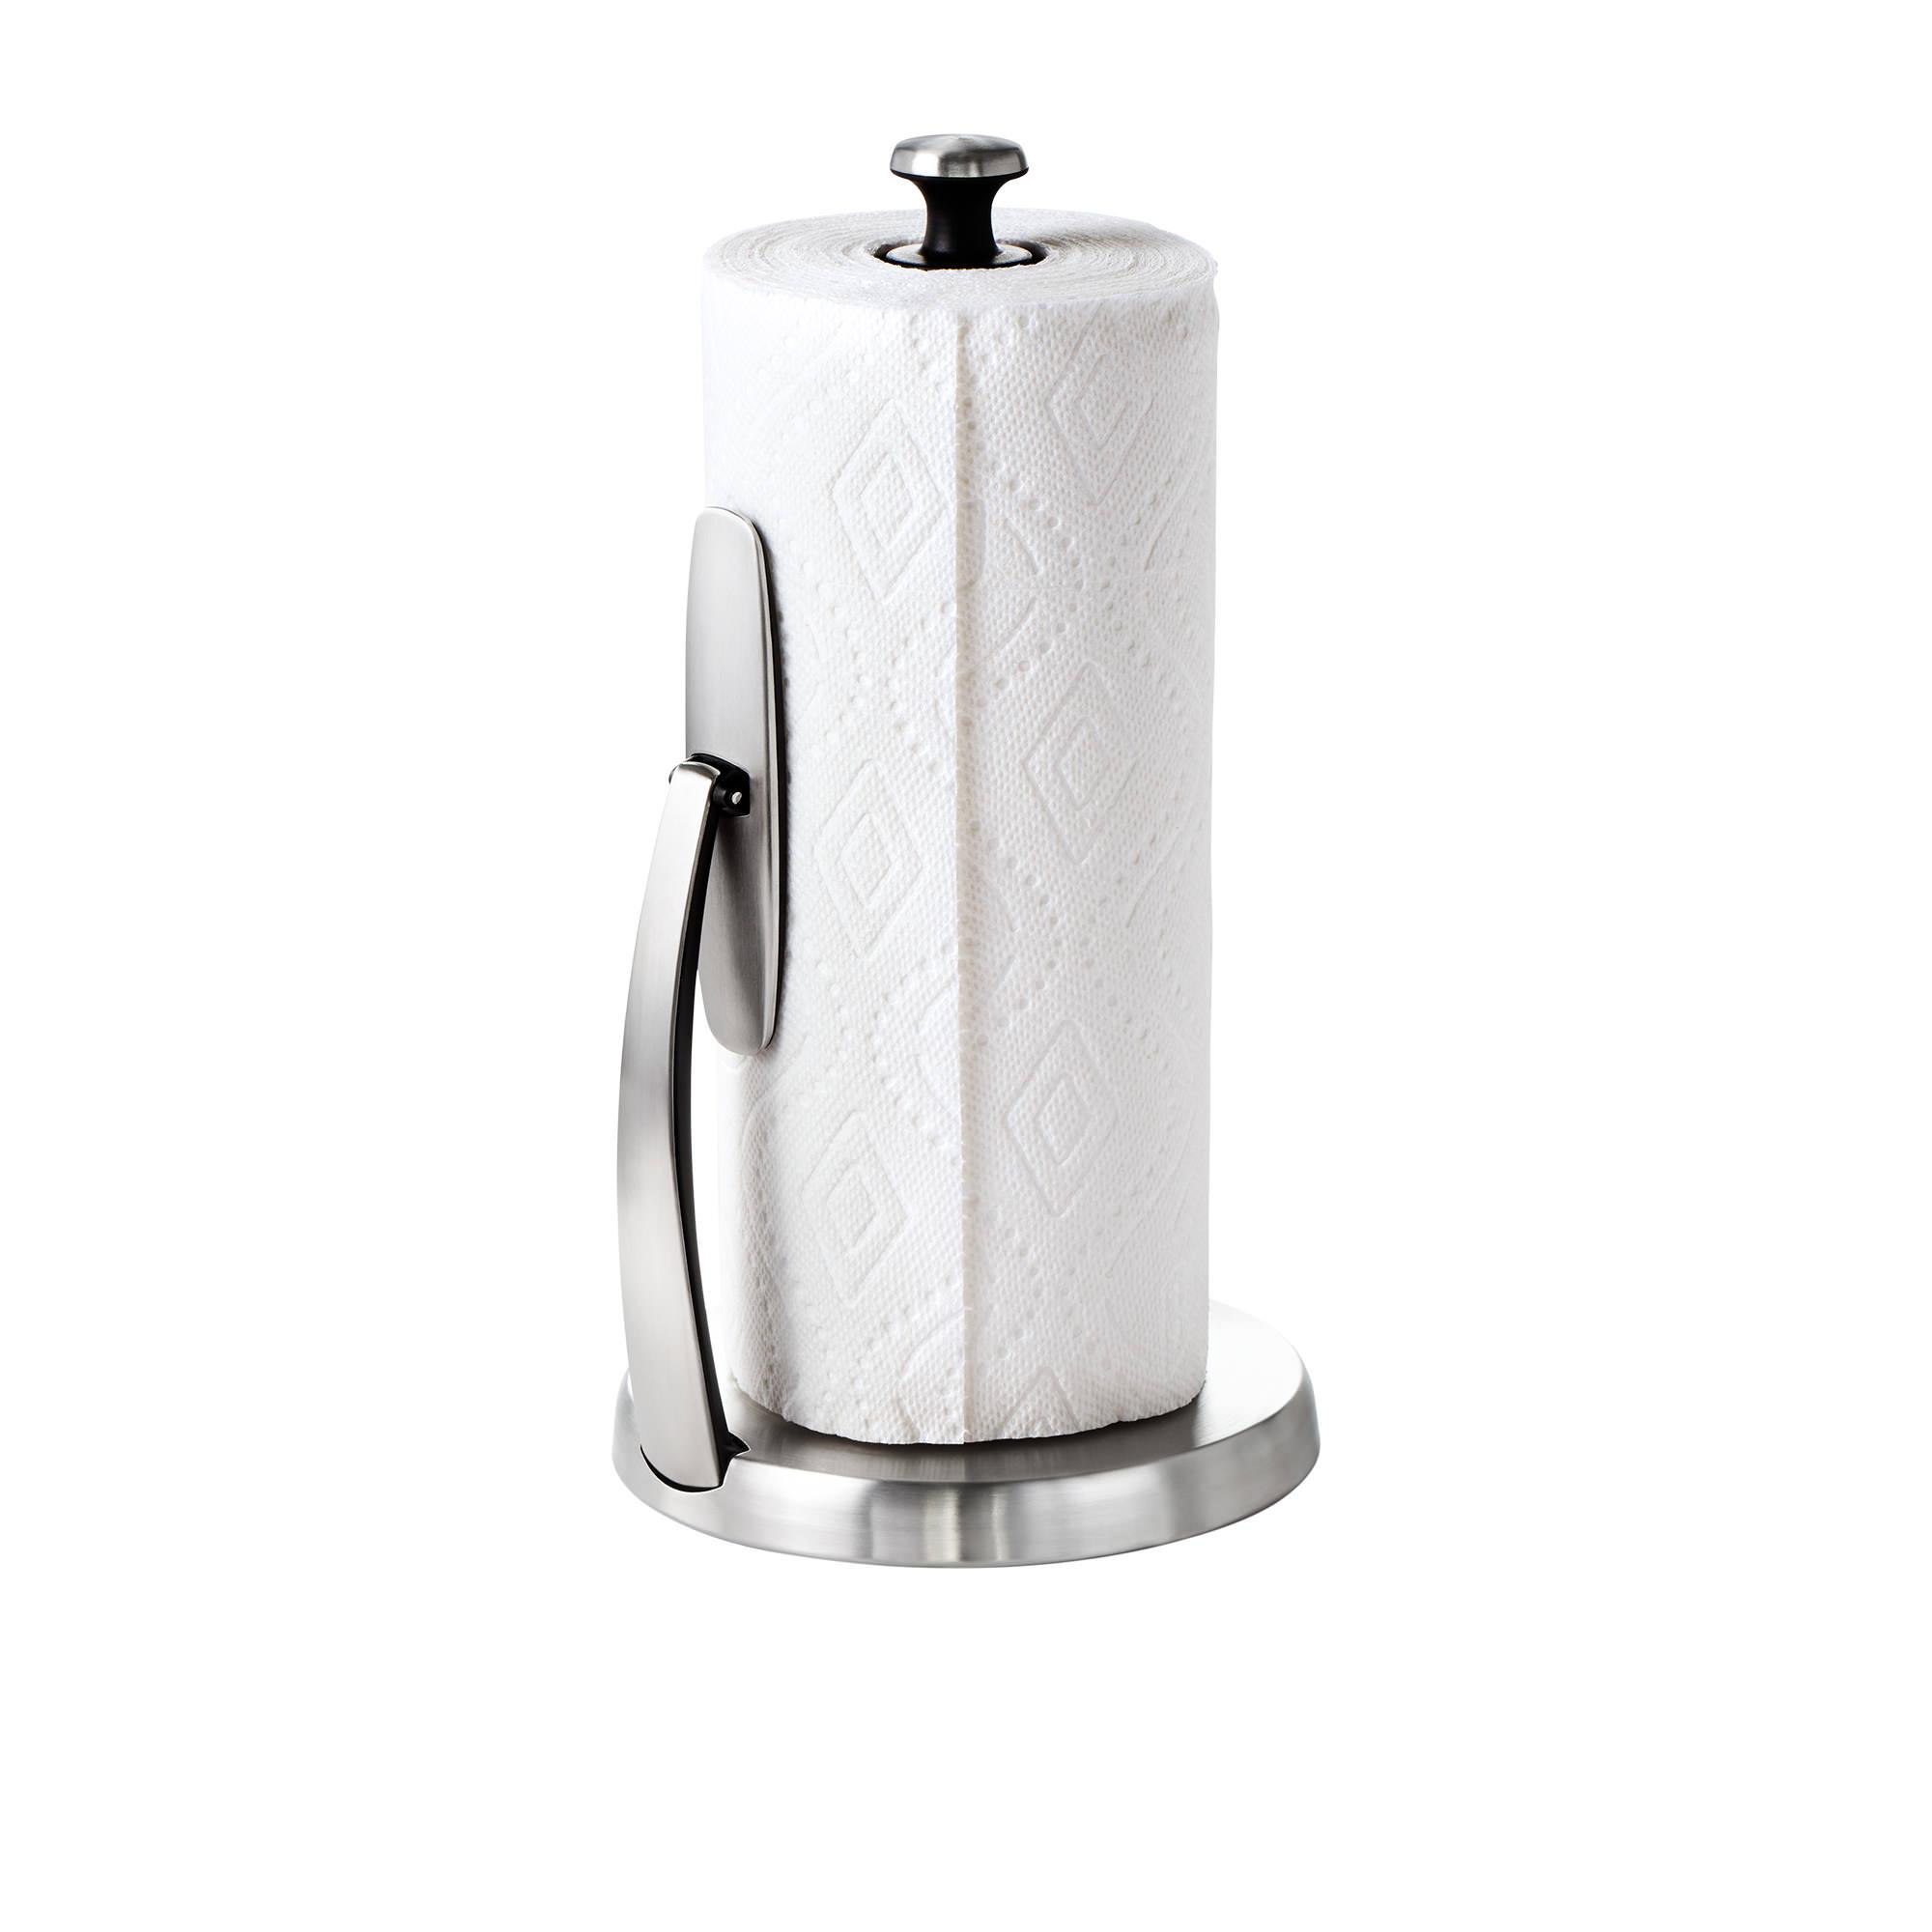 OXO Good Grips SimplyTear Paper Towel Holder Stainless Steel Image 3